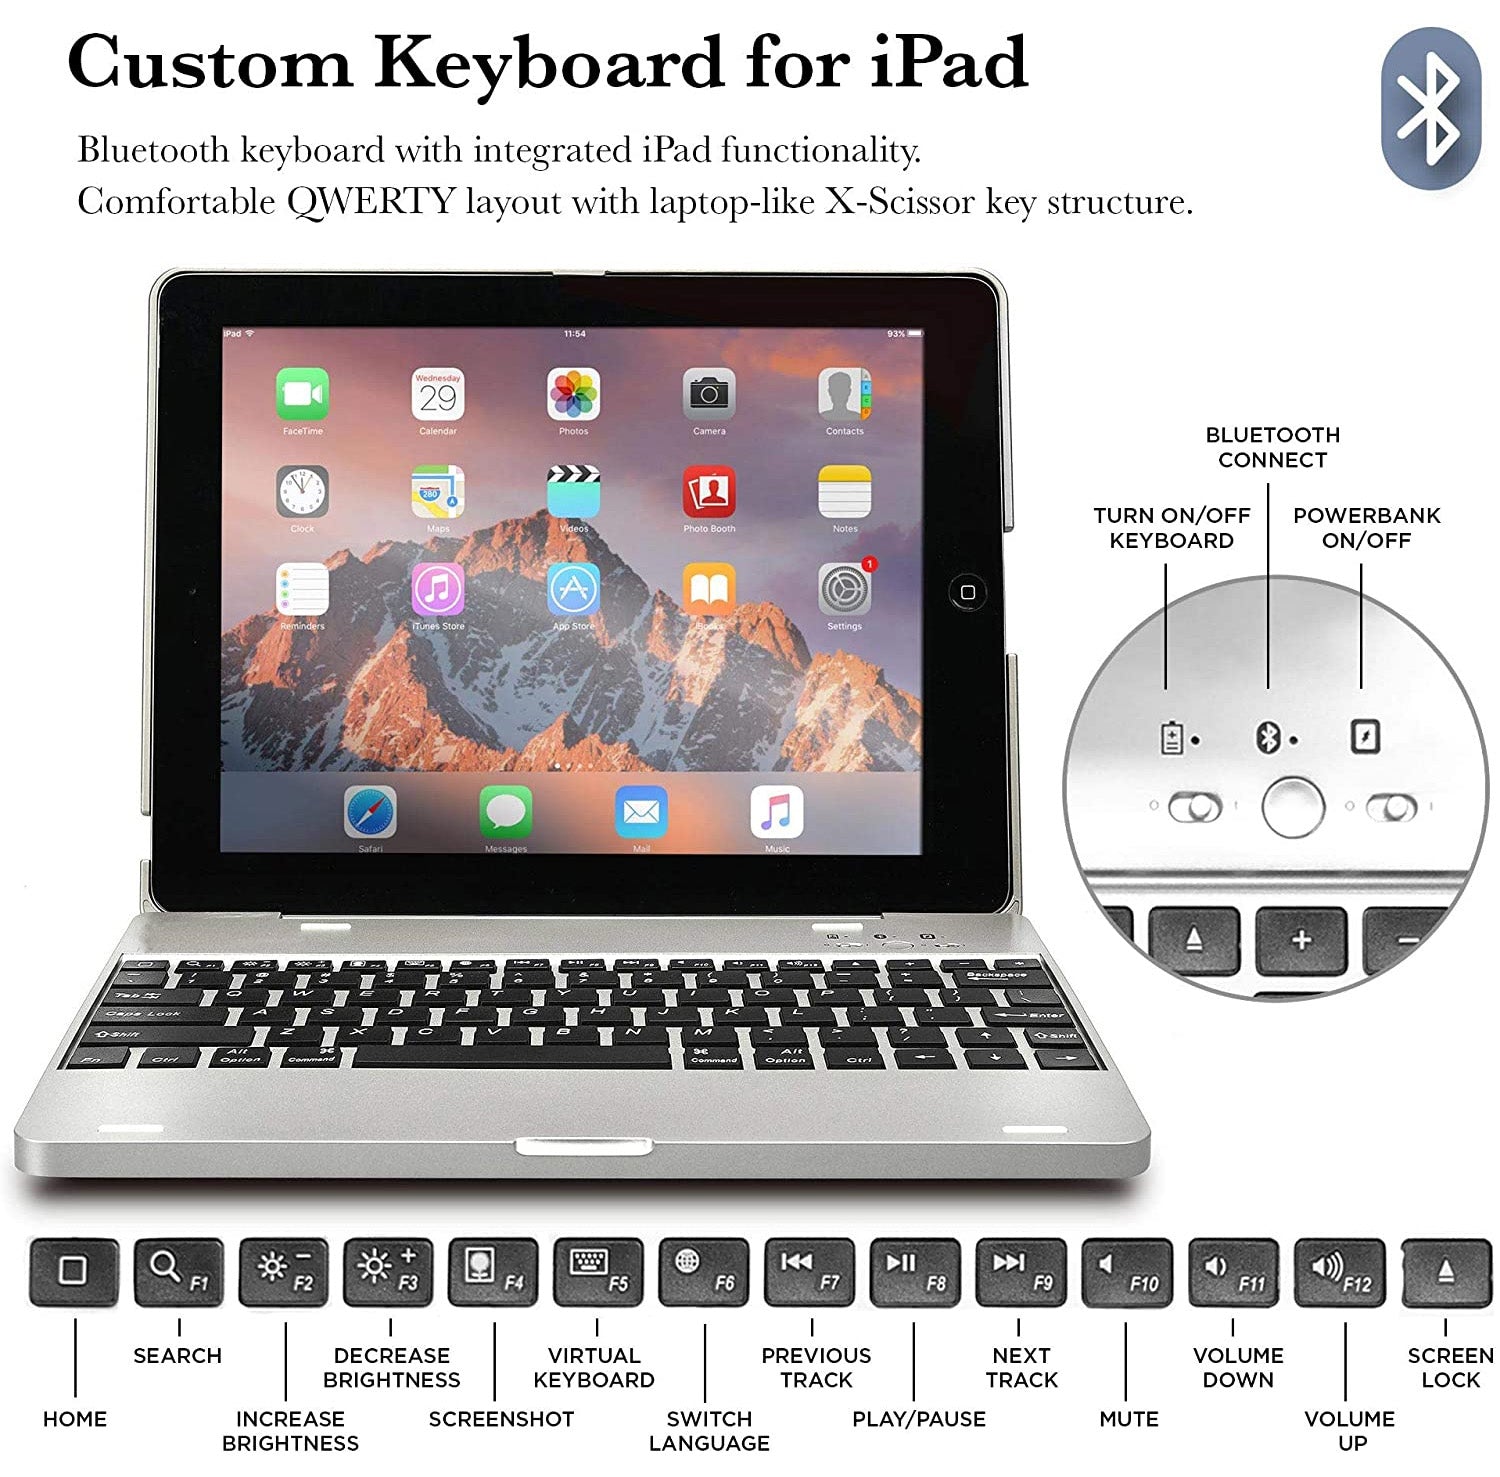 Keyboard Case For 9.7" iPad 2012 or older (2,3,4) - Gold & Cherry